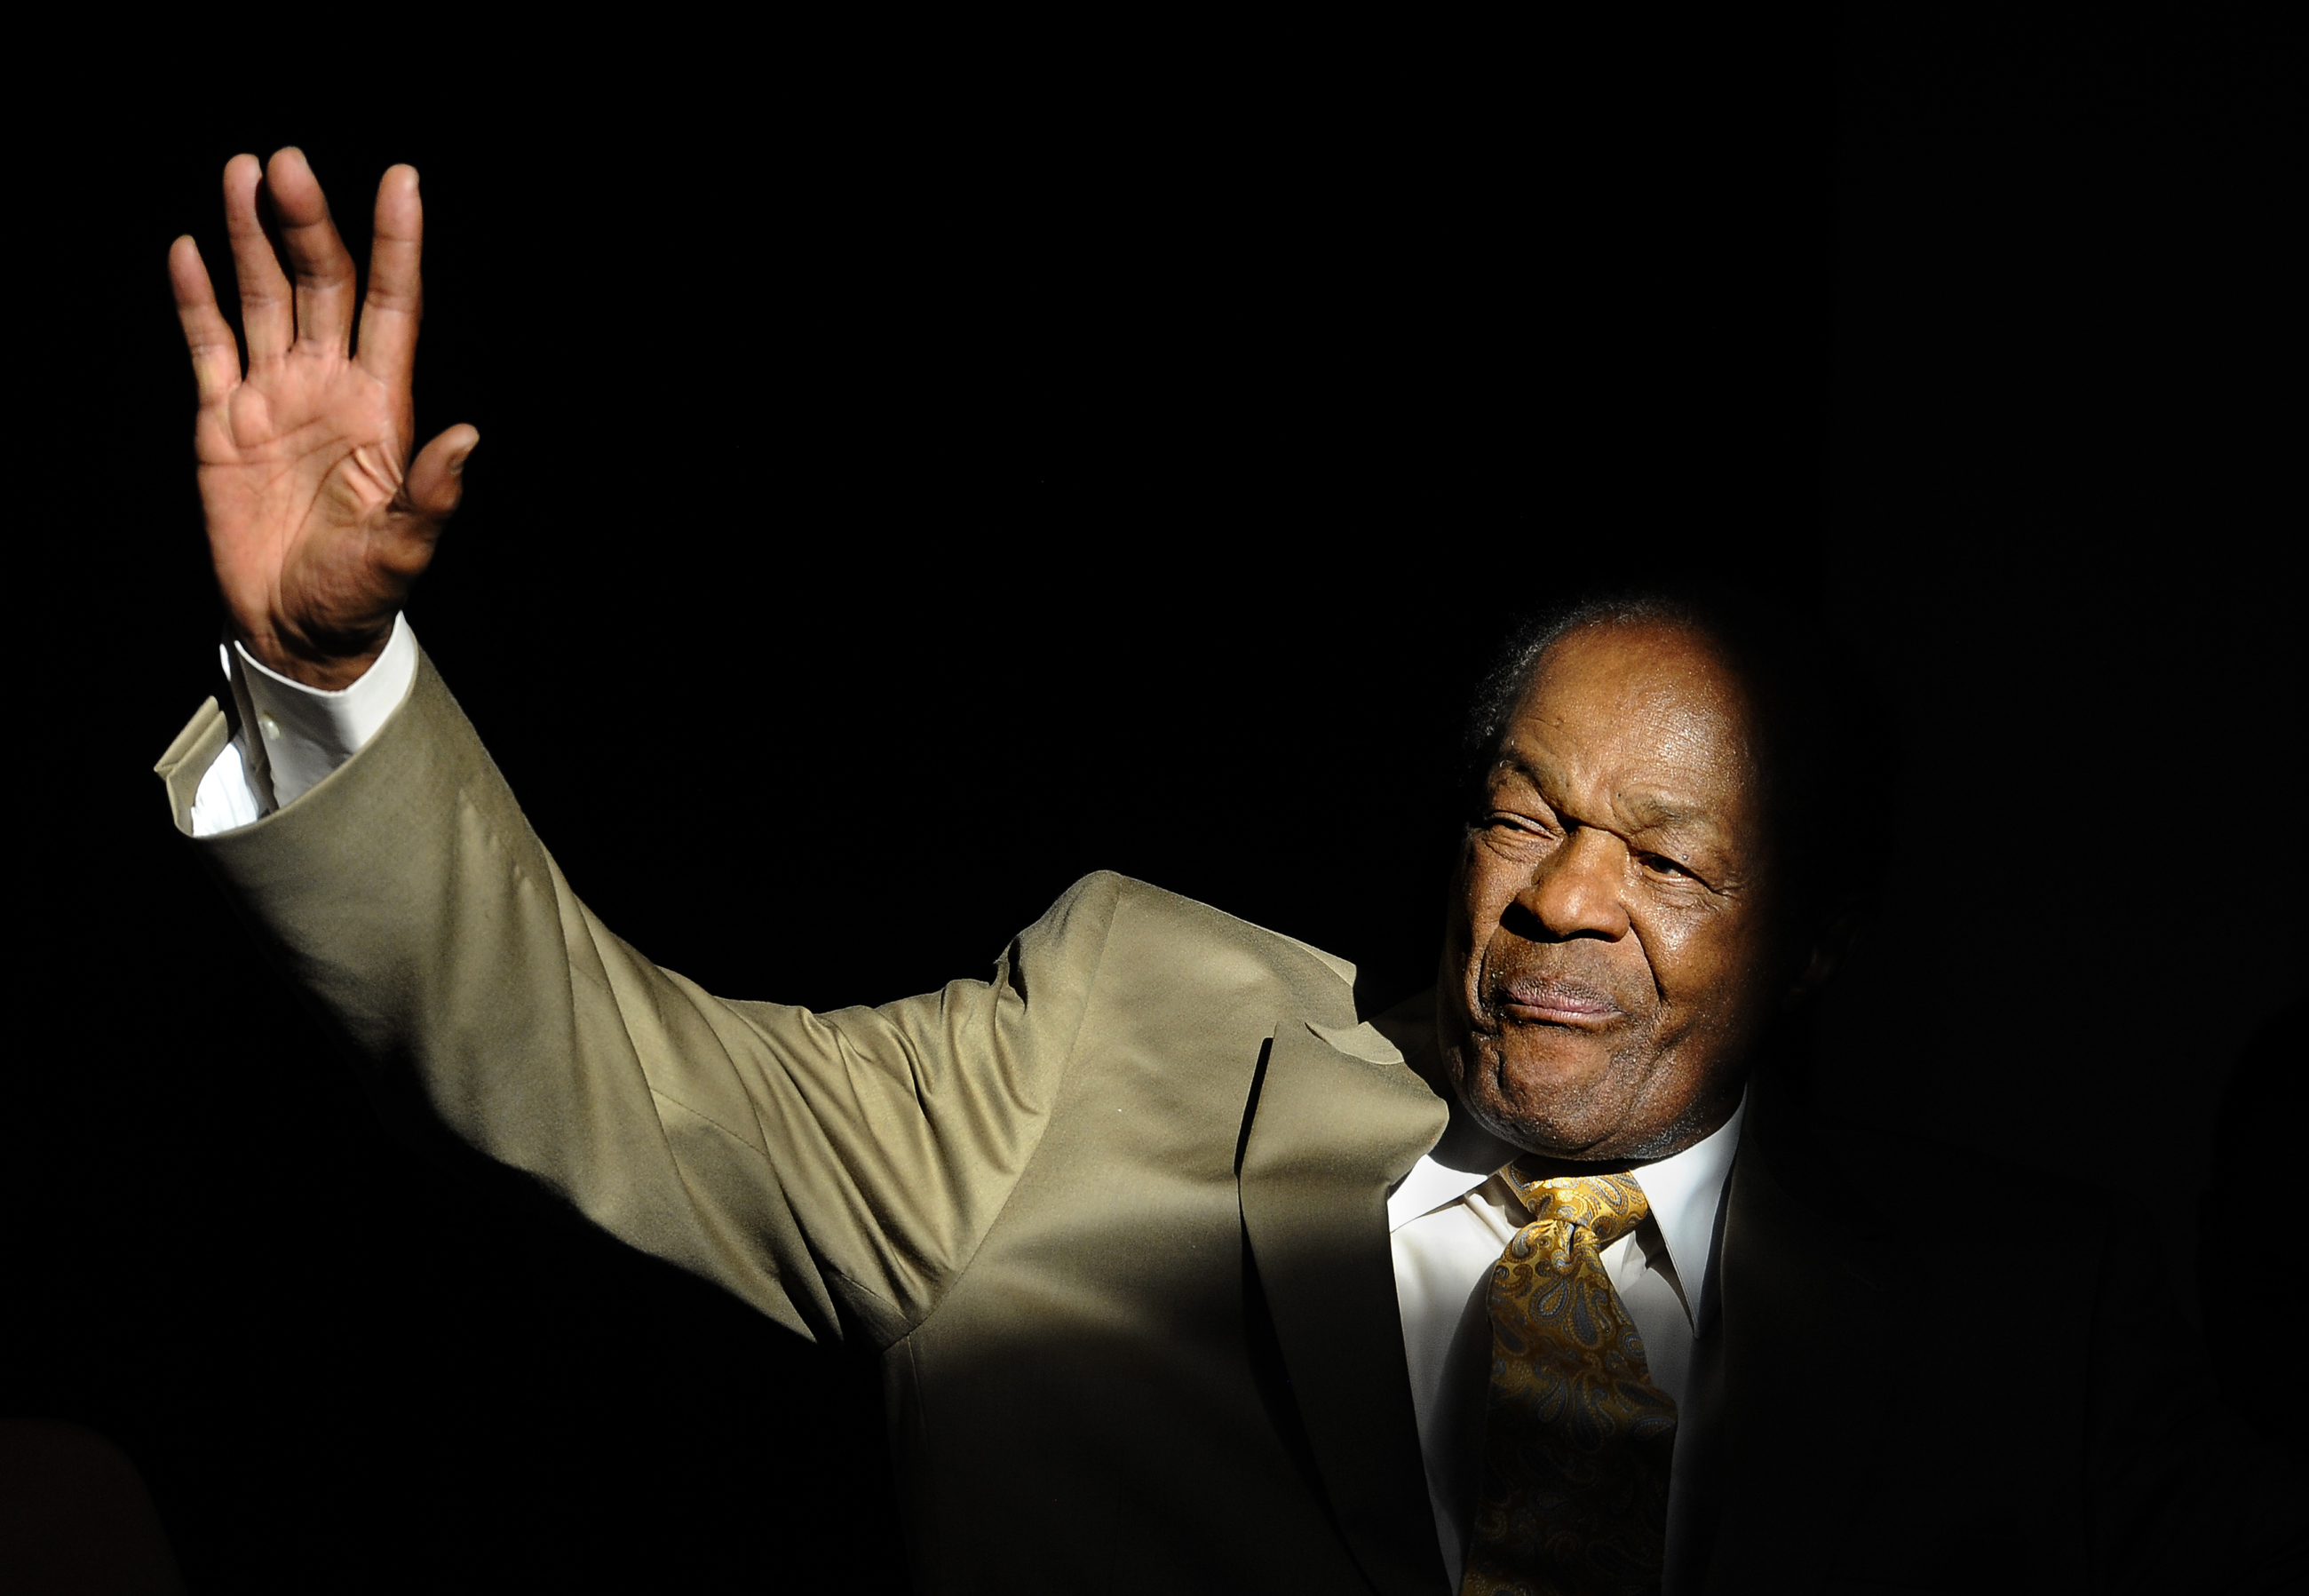 D.C. Council member Marion Barry discussed his new autobiography, "Mayor for Life: The Incredible Story of Marion Barry, Jr." during an event hosted by the Washington Informer at the Old Congress Heights School in S.E. Washington. (The Washington Post&mdash;The Washington Post/Getty Images)